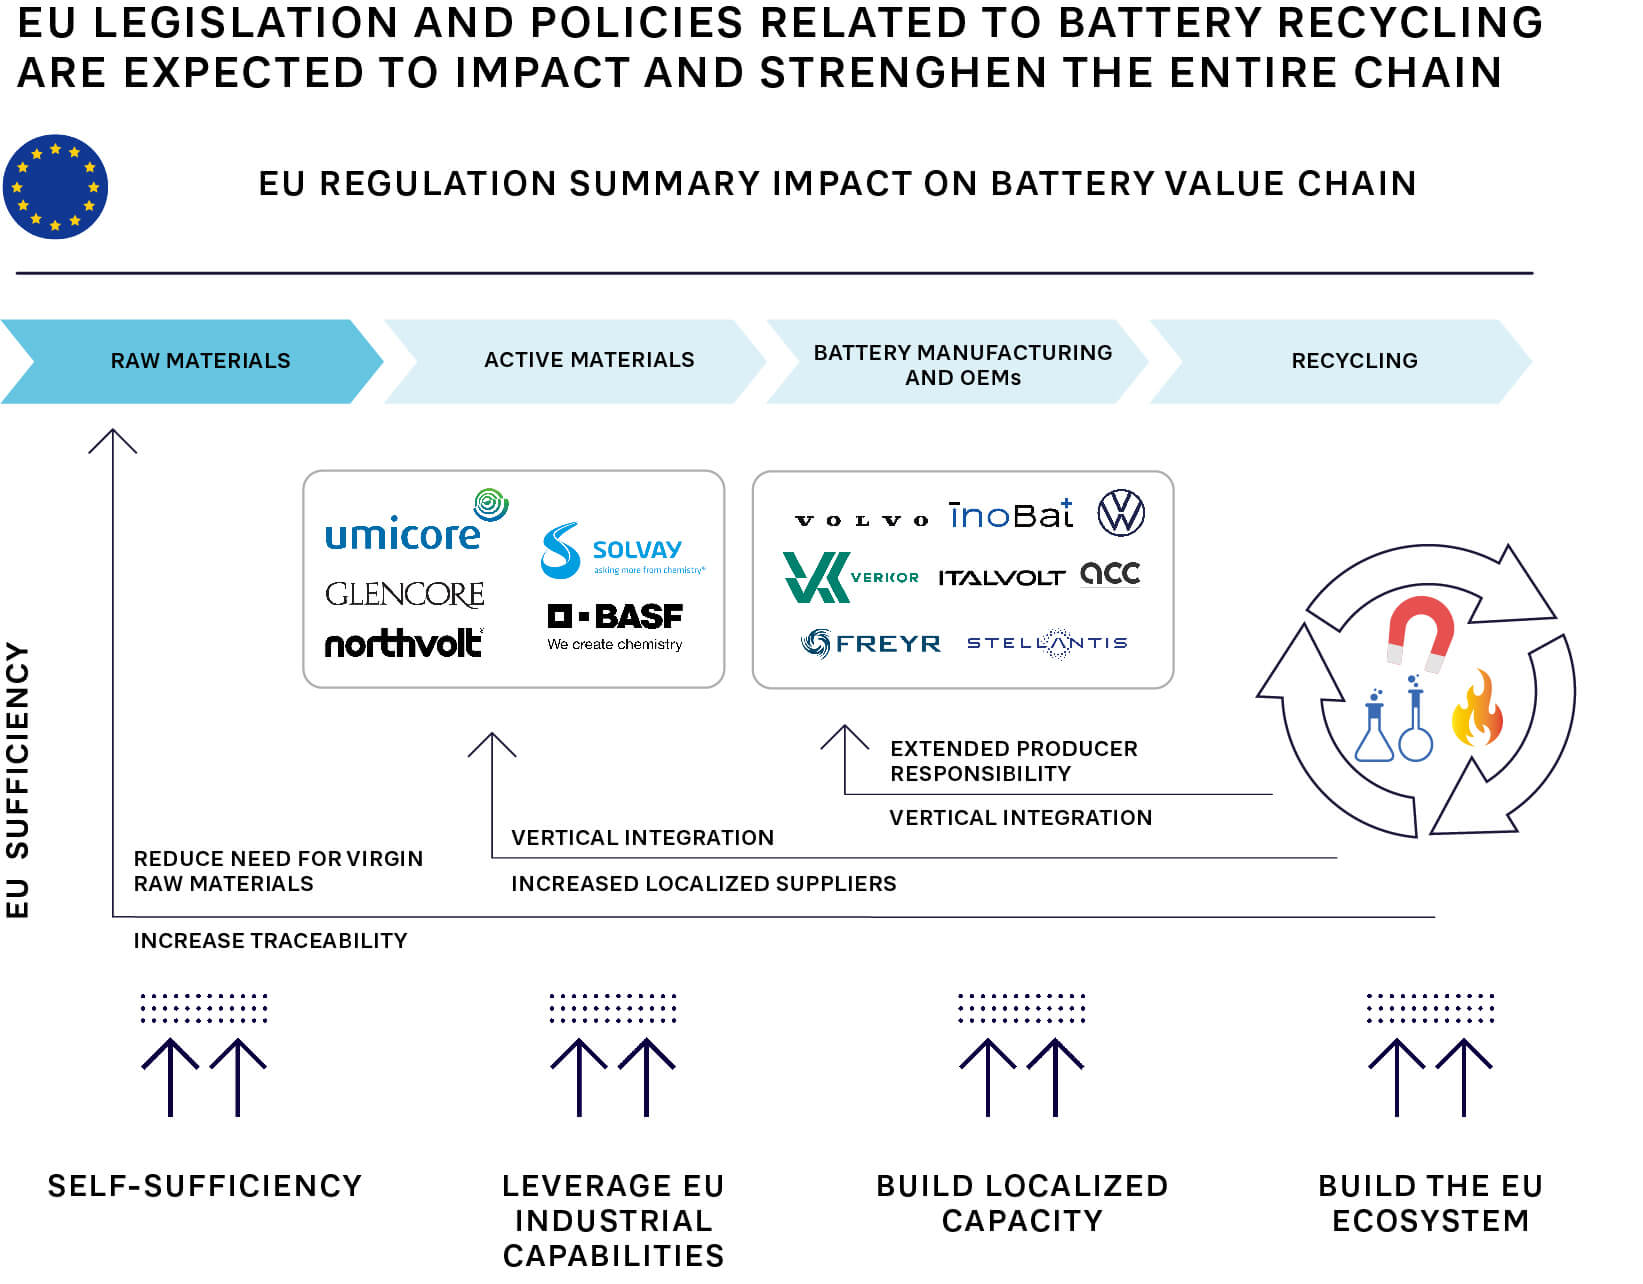 FIGURE 2: IMPACT OF EU LEGISLATION AND POLICIES ON BATTERY VALUE CHAIN